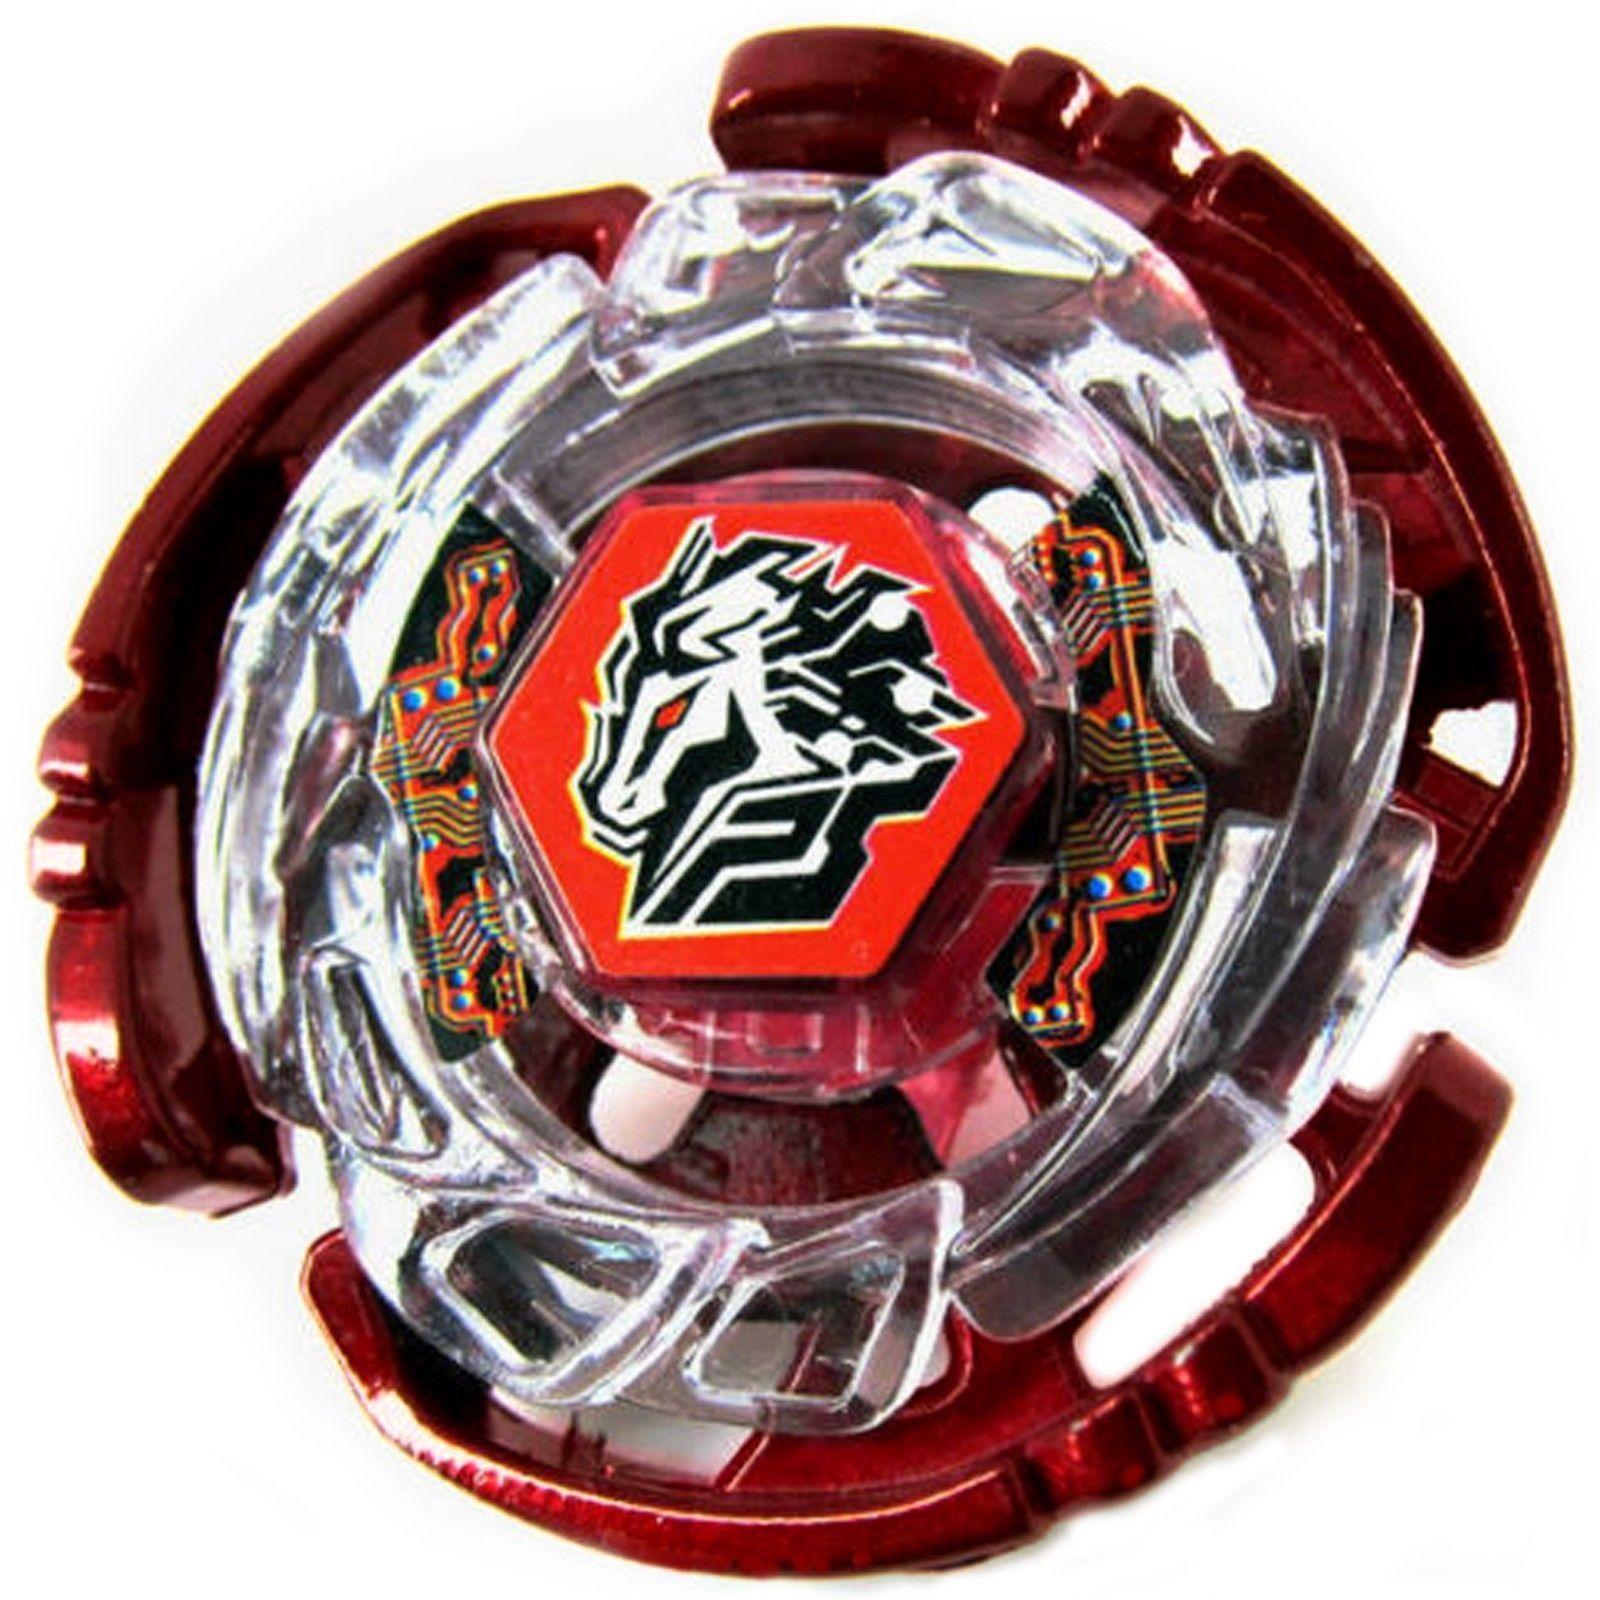 DS Cyber Pegasus (Pegasis) 4D Metal Fight Beyblade (Astro Spegasis